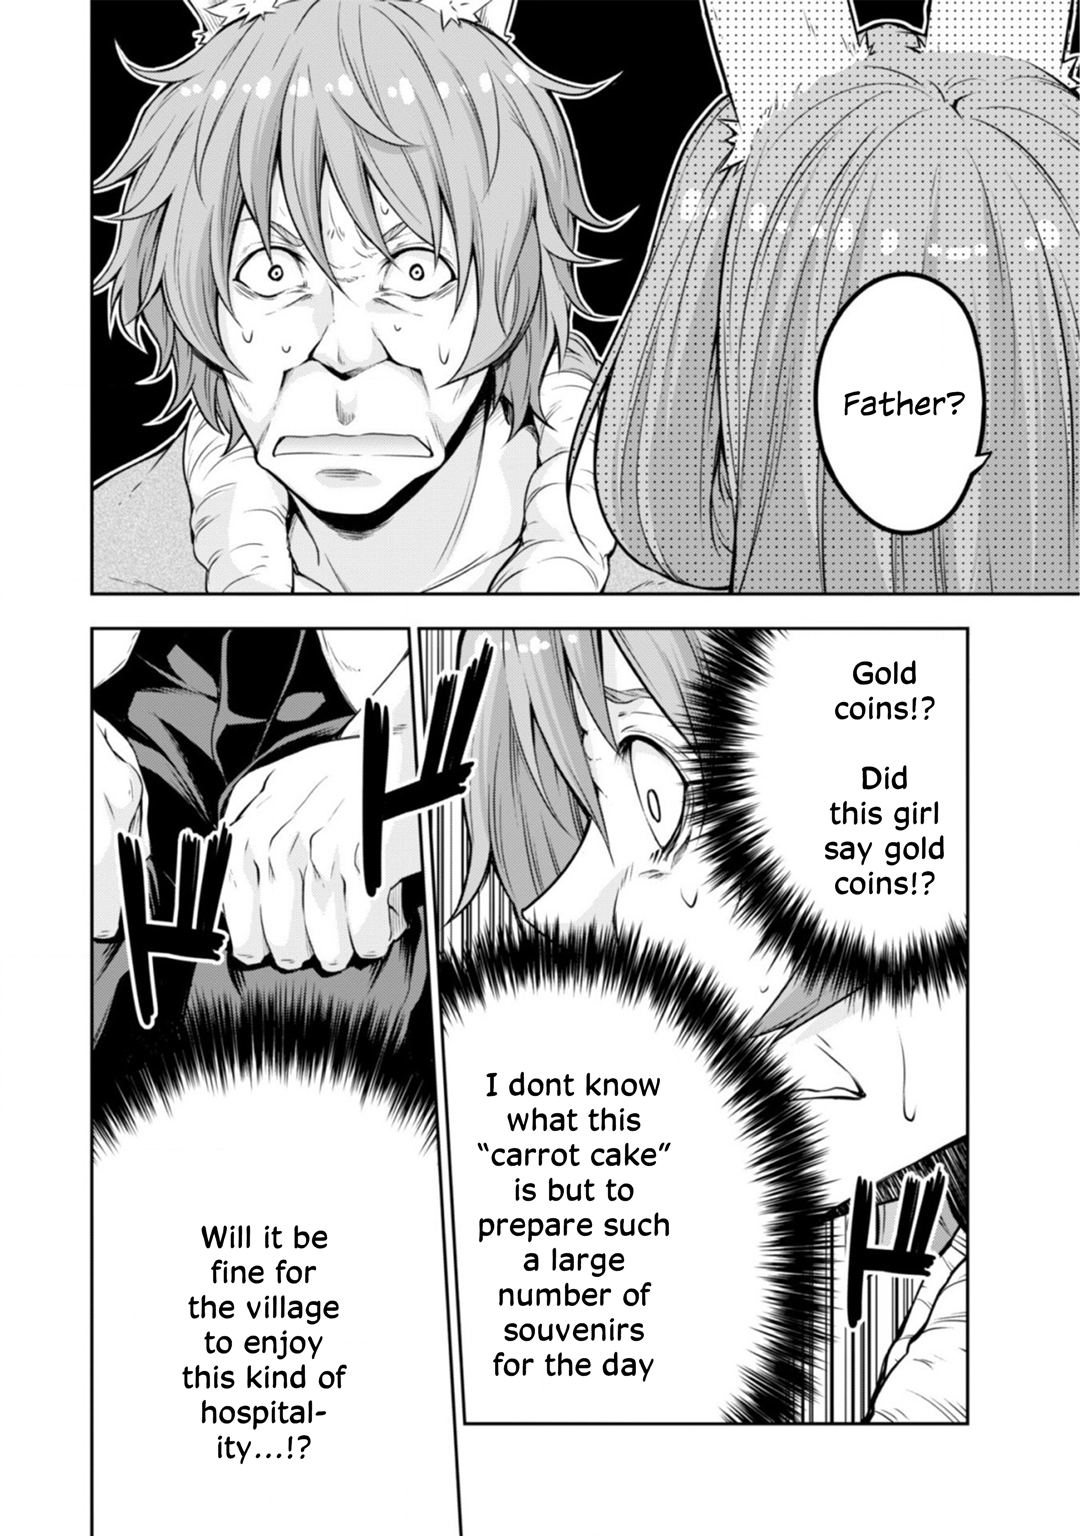 Tensei Shitara Slime Datta Ken: The Ways Of Strolling In The Demon Country Vol.7 Chapter 35